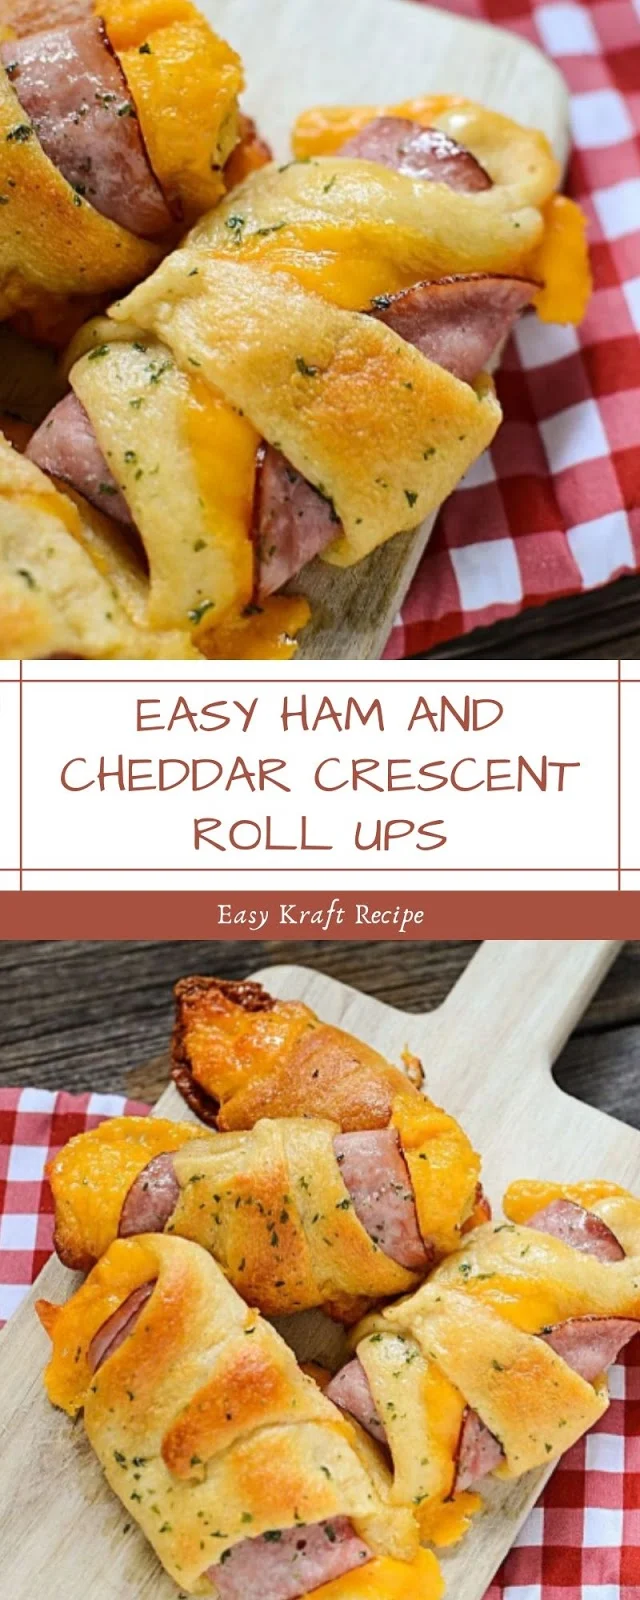 EASY HAM AND CHEDDAR CRESCENT ROLL UPS